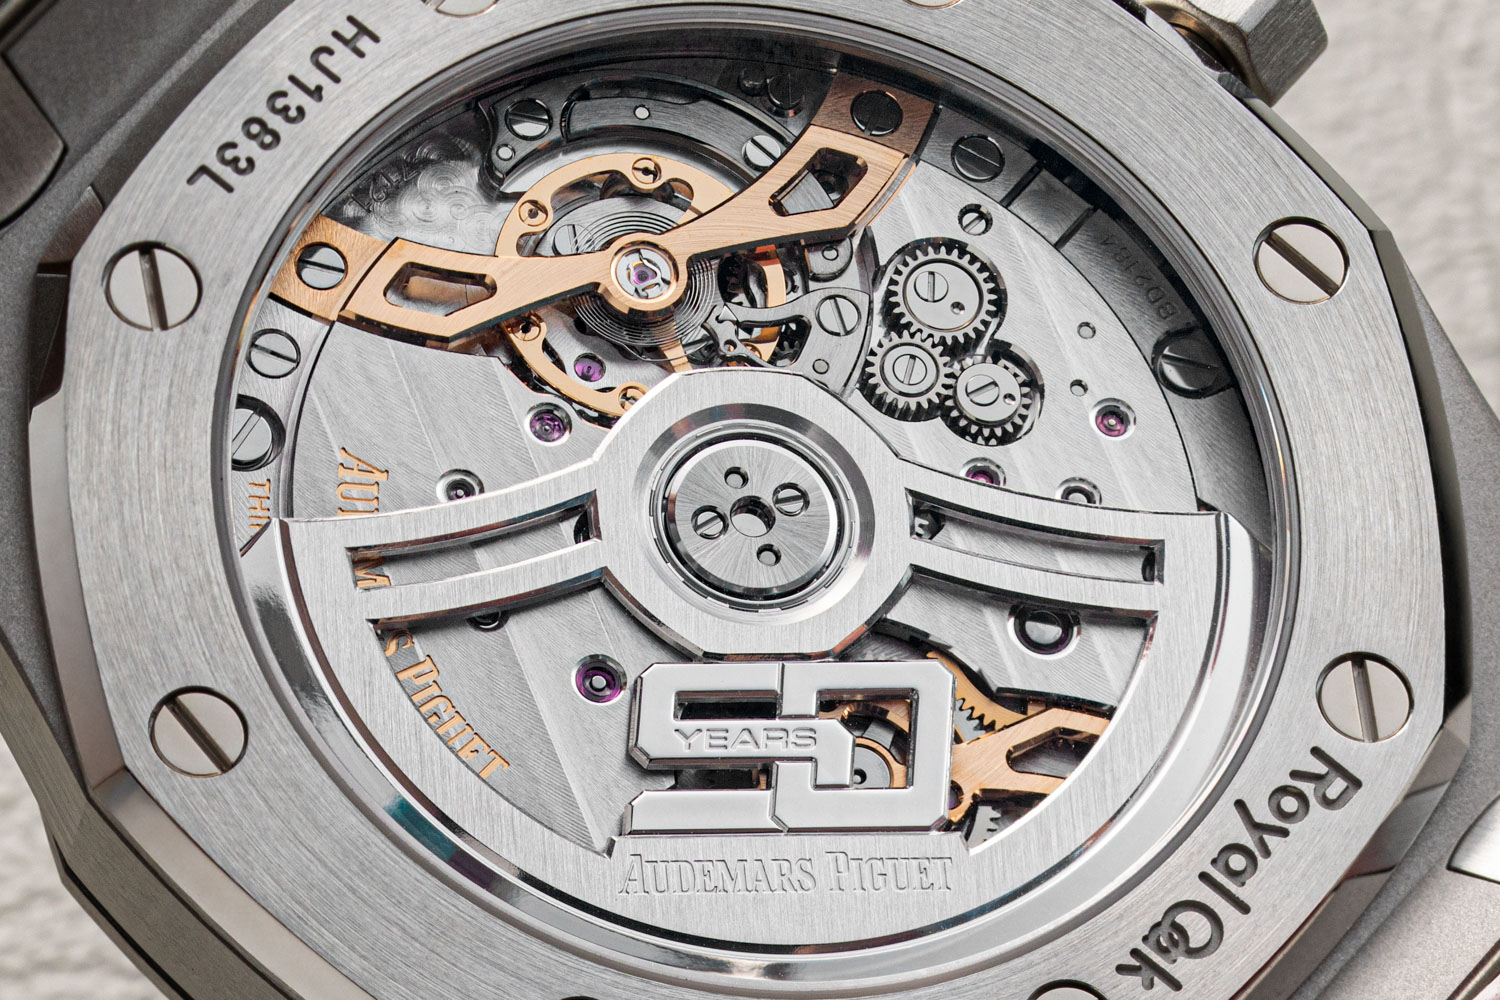 The all new Calibre 7121 visible through the caseback showing off its traversing balance bridge and special 50th anniversary rotor (©Revolution)